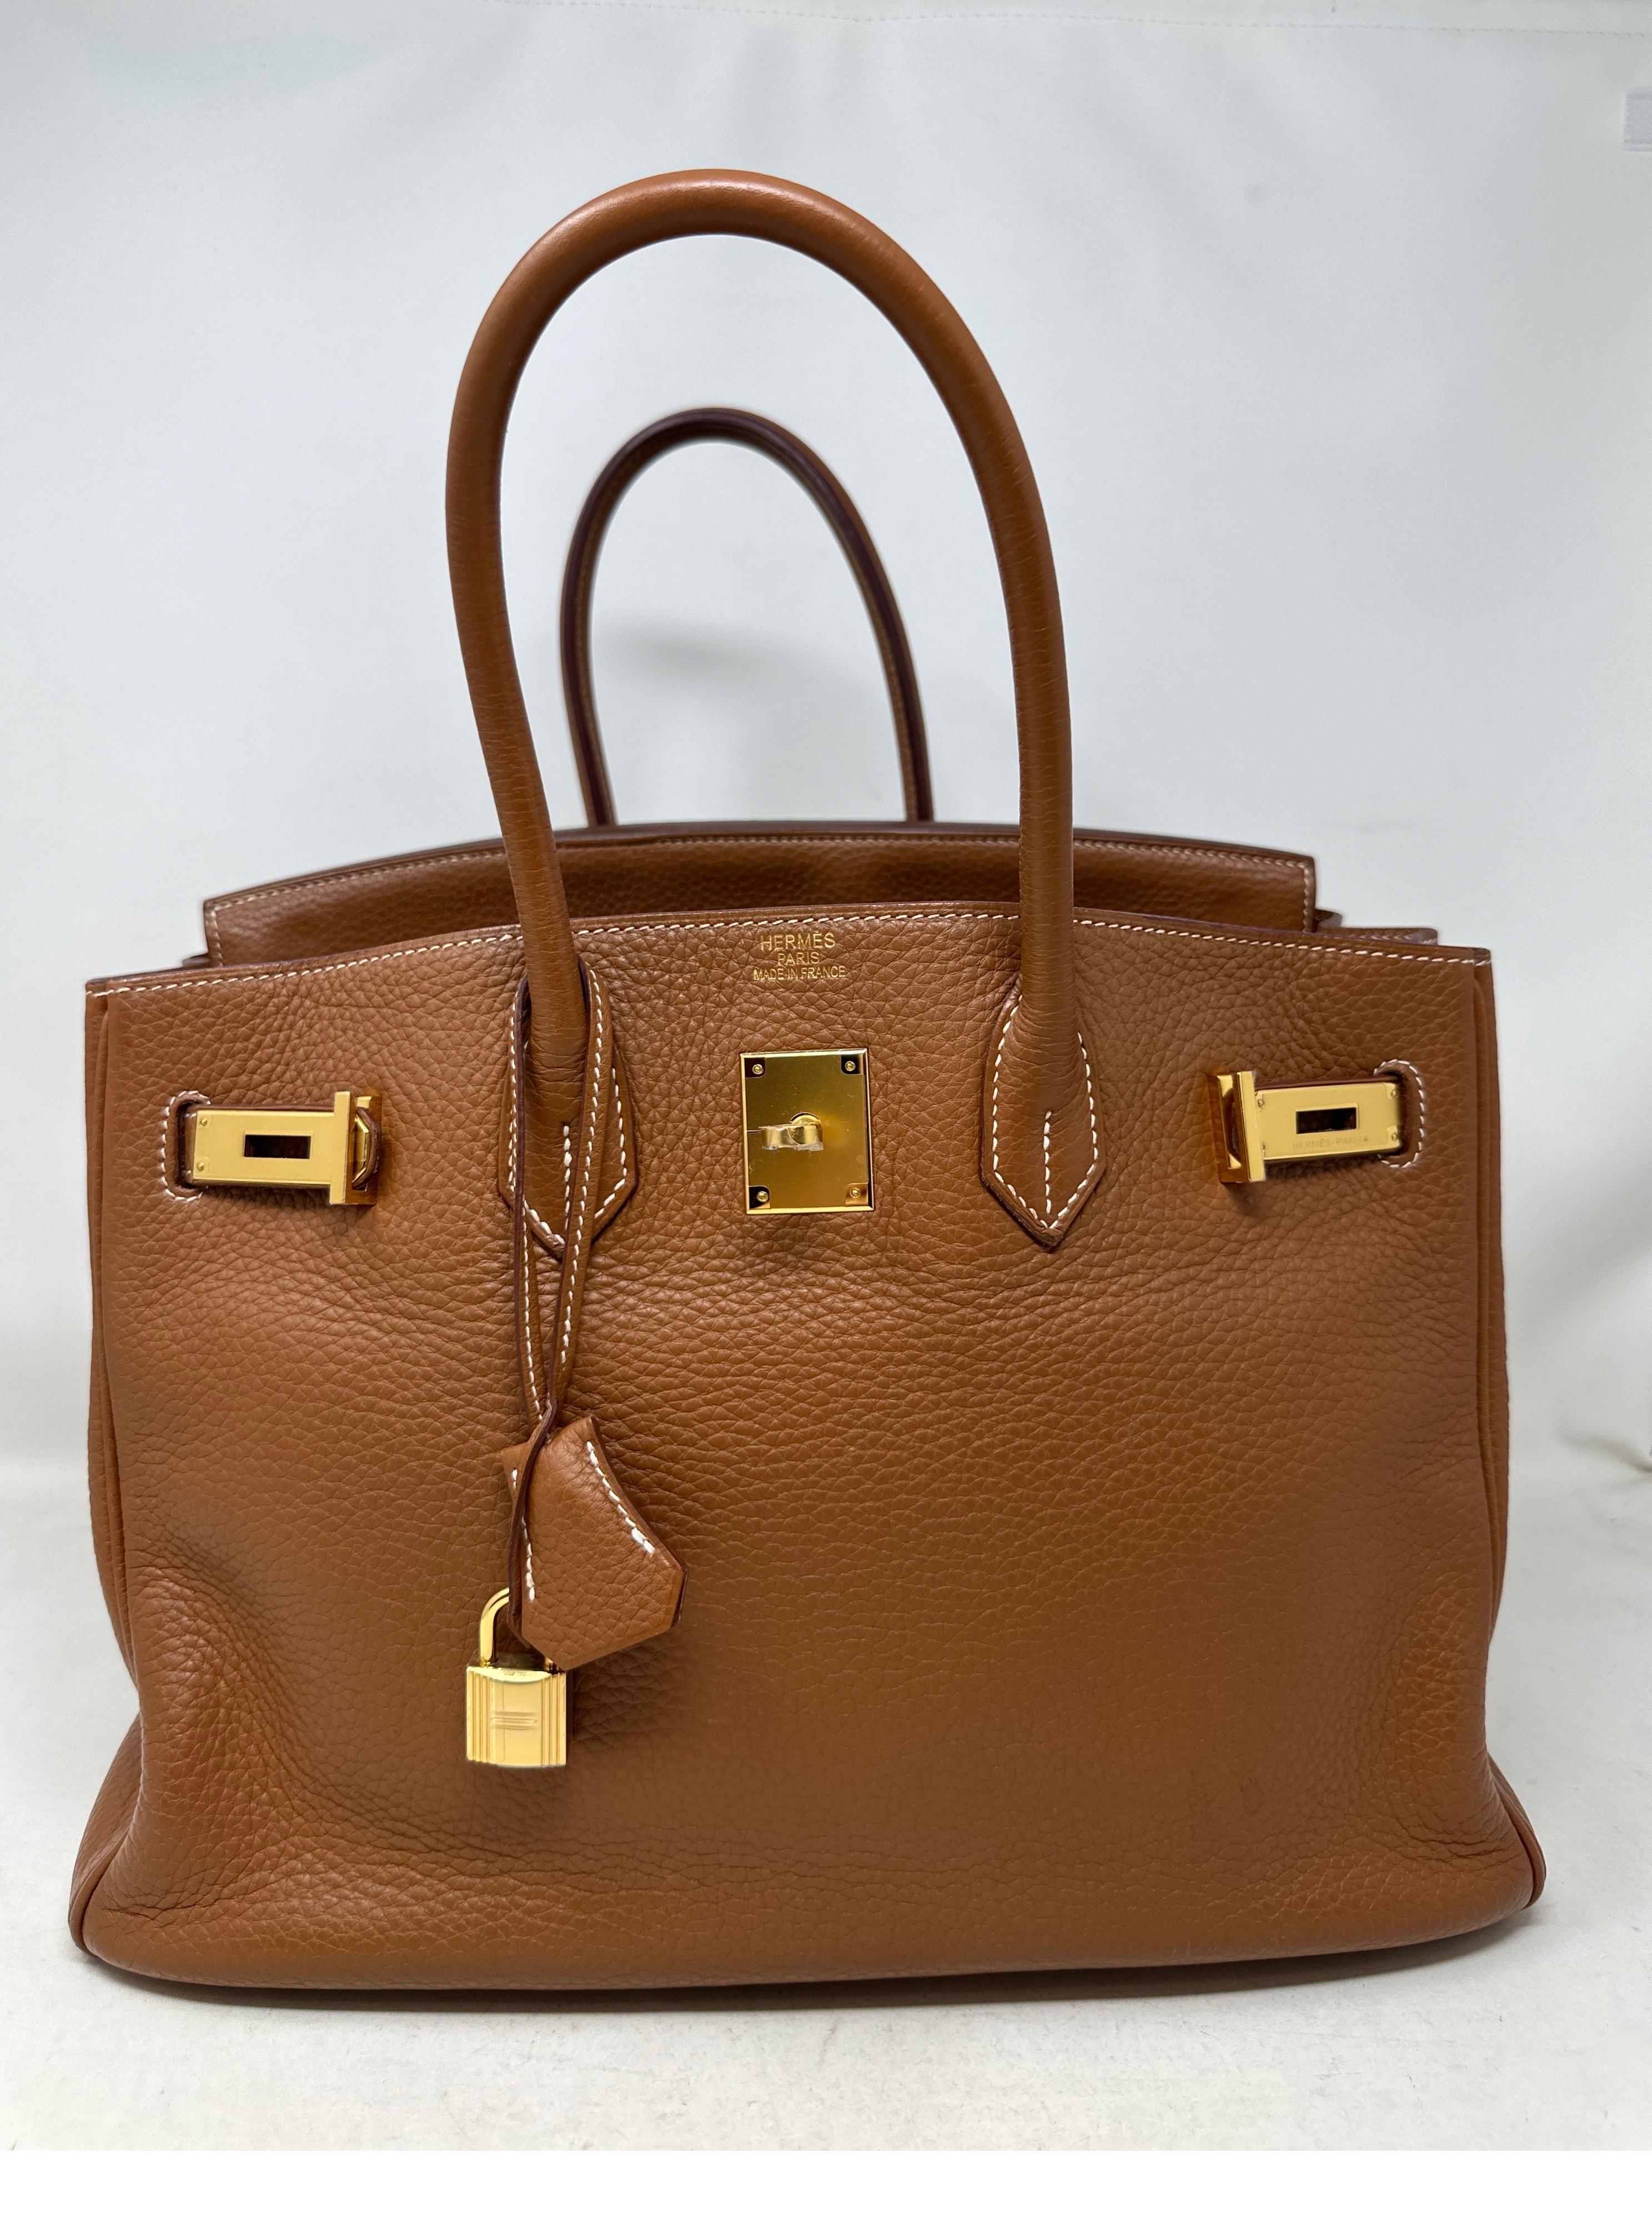 Hermes Gold Birkin 35 Bag. Gold hardware. Most wanted combination. Gold on gold. Clemence leather. Interior clean. Plastic is still on hardware. Includes clochette, lock, keys, and dust bag. The most classic combination. Don't miss out on this one.